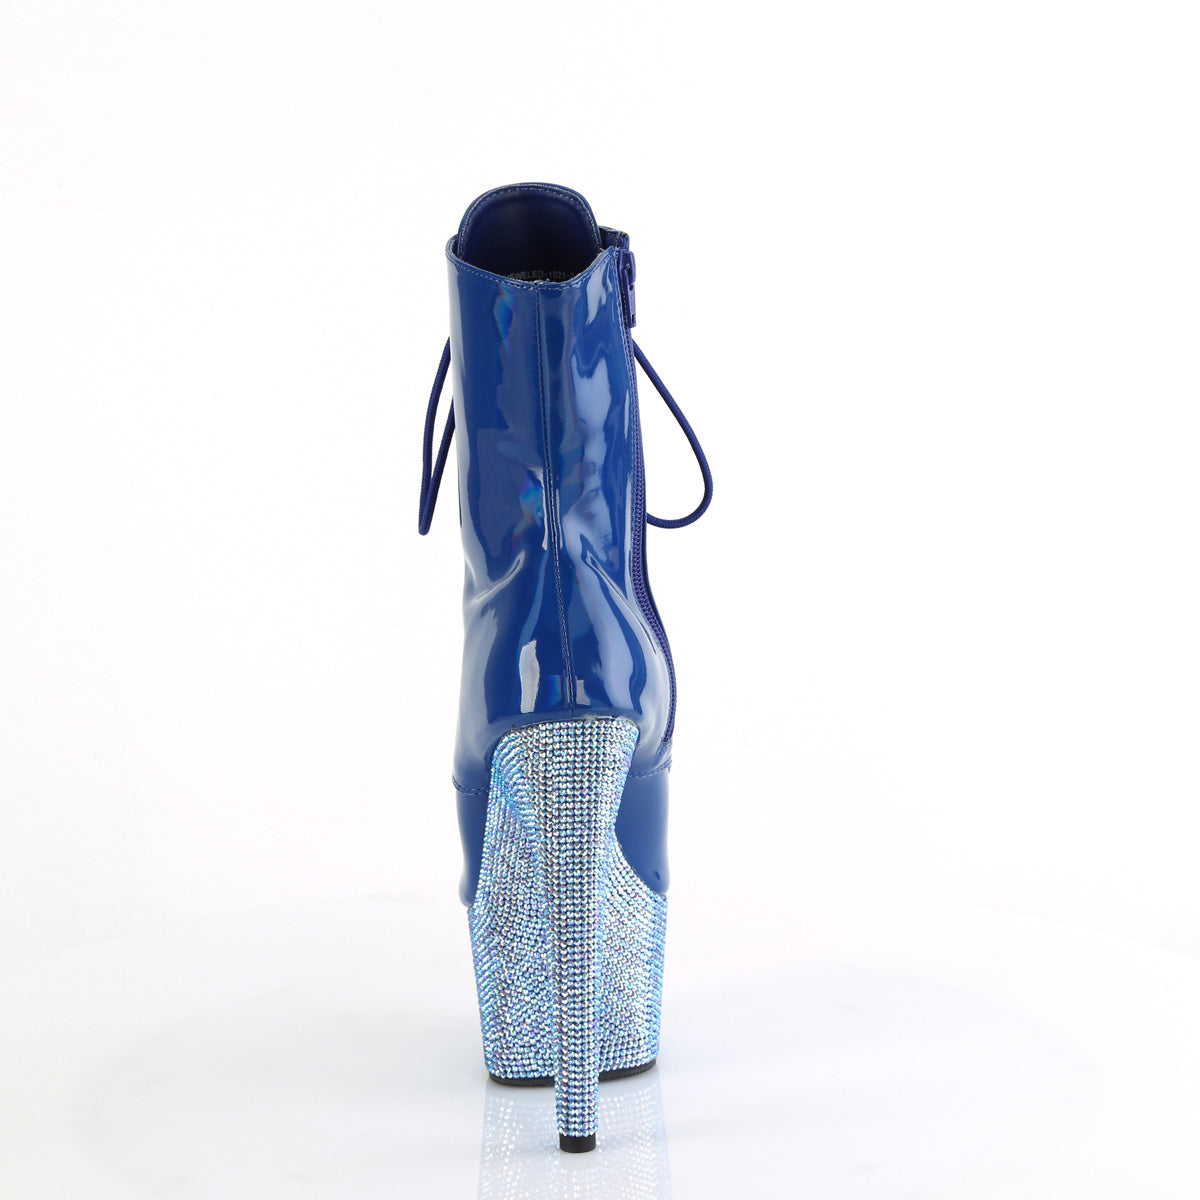 7 Inch Heel BEJEWELED-1021-7 Blue Holo Patent